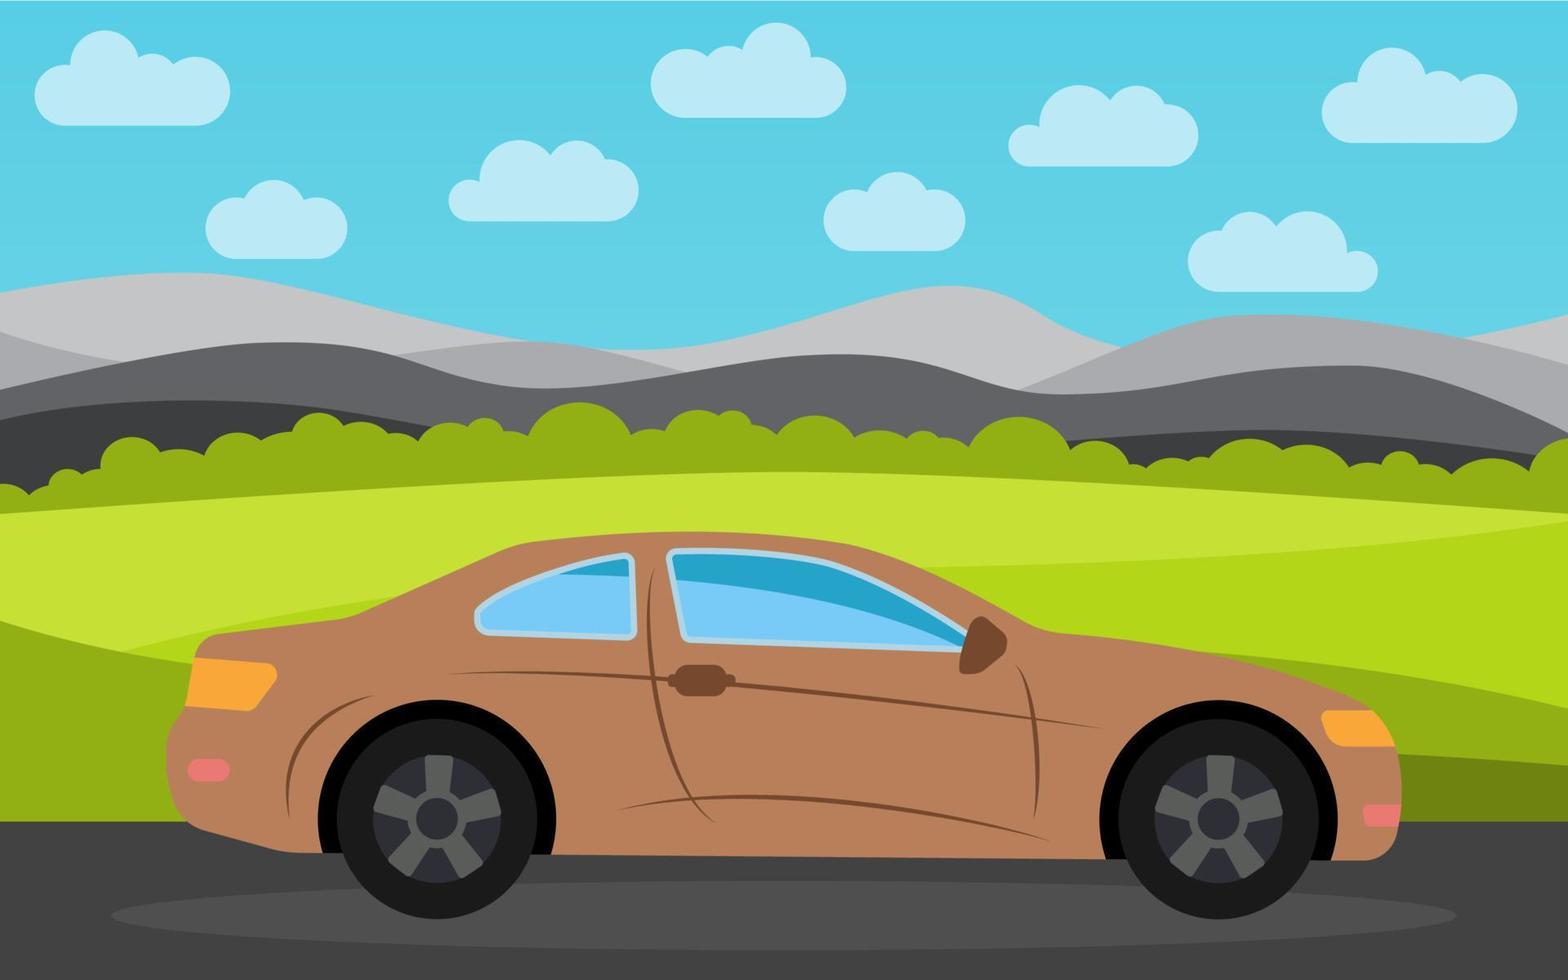 Brown sports car in the background of nature landscape in the daytime. Vector illustration.